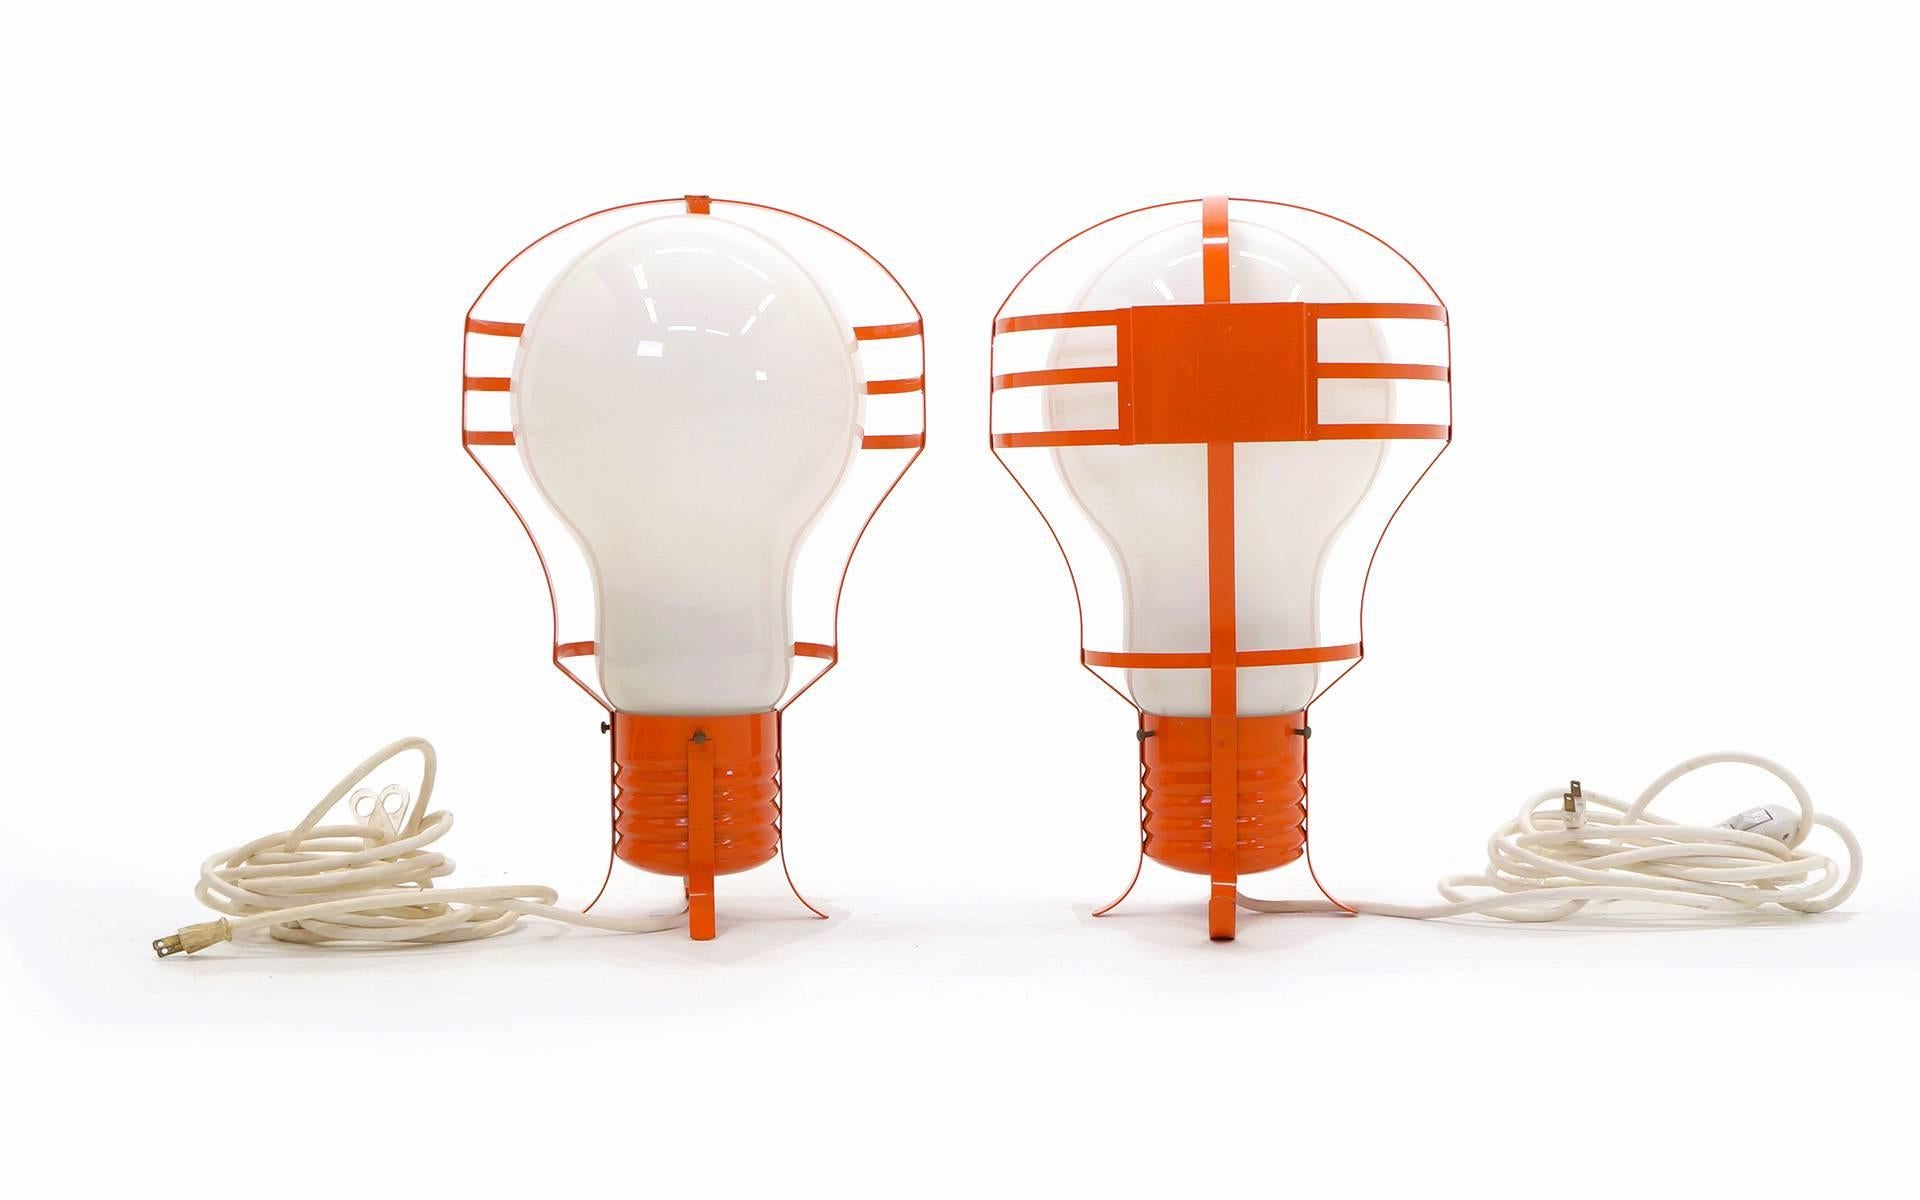 Striking pair of 1960s Italian oversized light bulb lamps. These can stand on end on their side or can be hung by the white cord. Orange lacquered steel frames over the glass bulbs give the look of an Industrial work lamp.